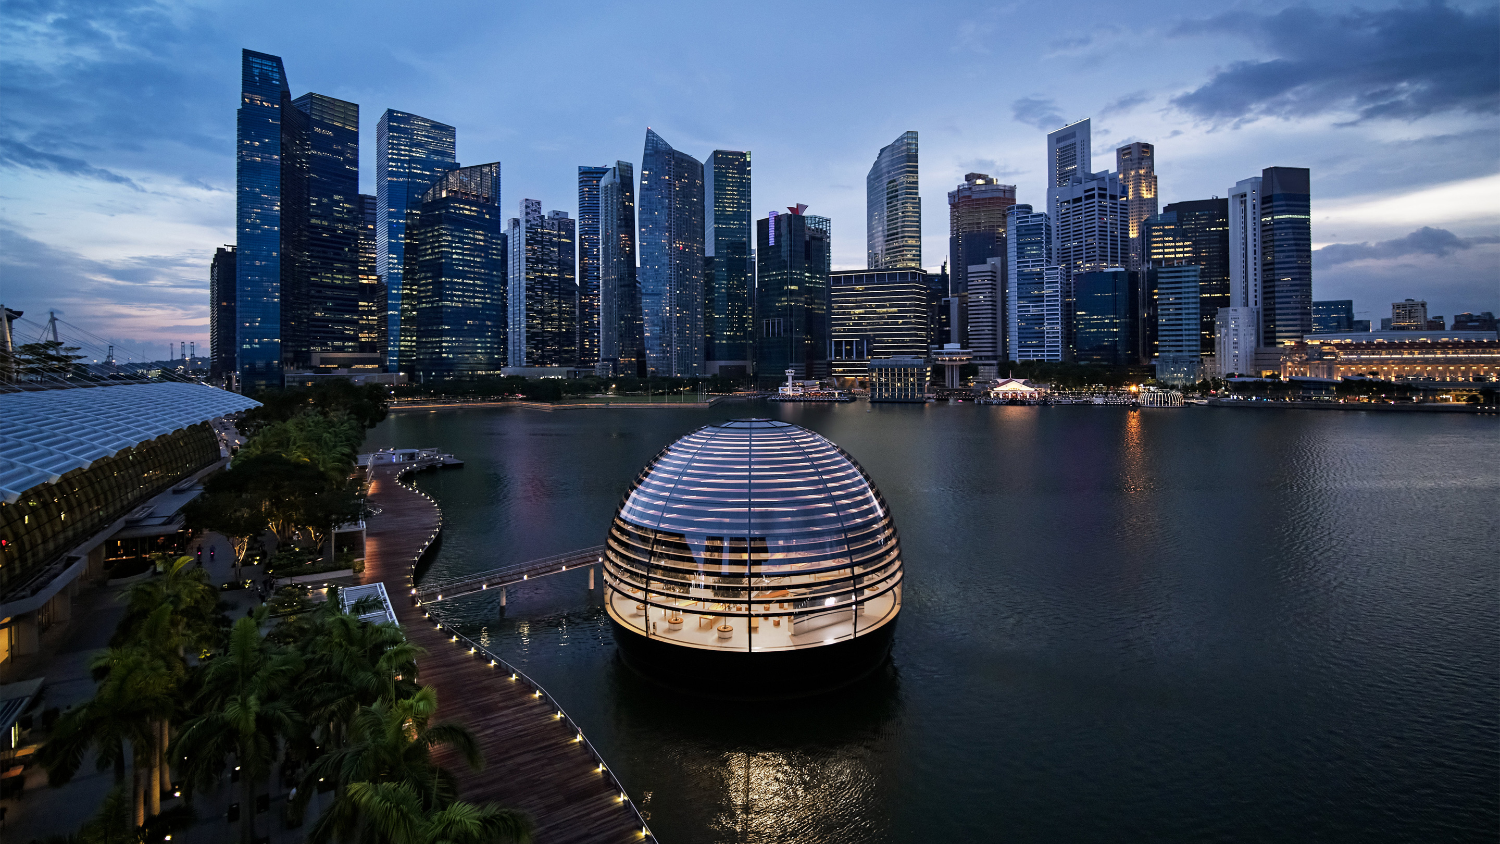 Apple Marina Bay Sands opens Thursday in Singapore